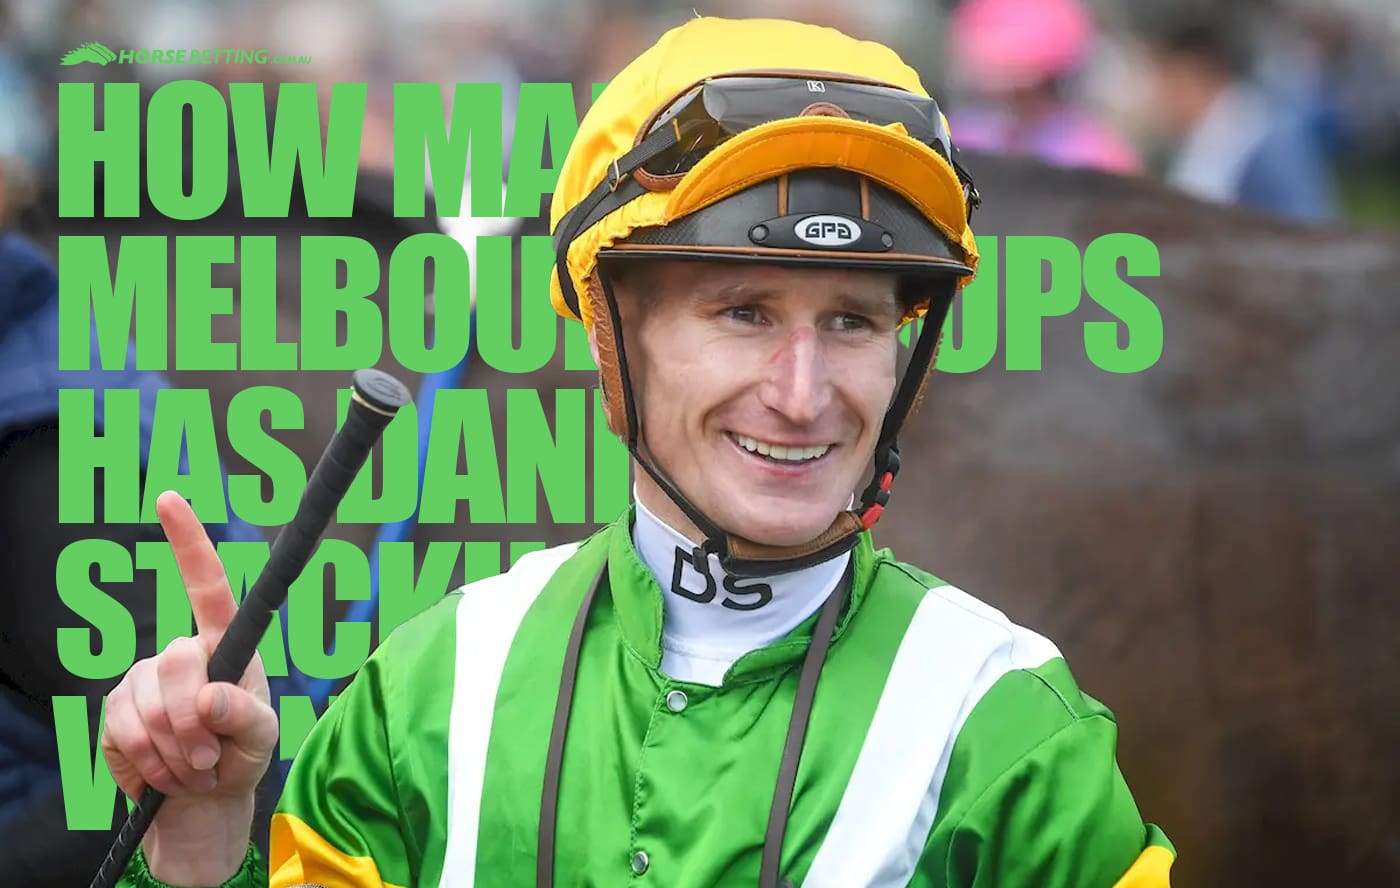 How many Melbourne Cups has Daniel Stackhouse won?